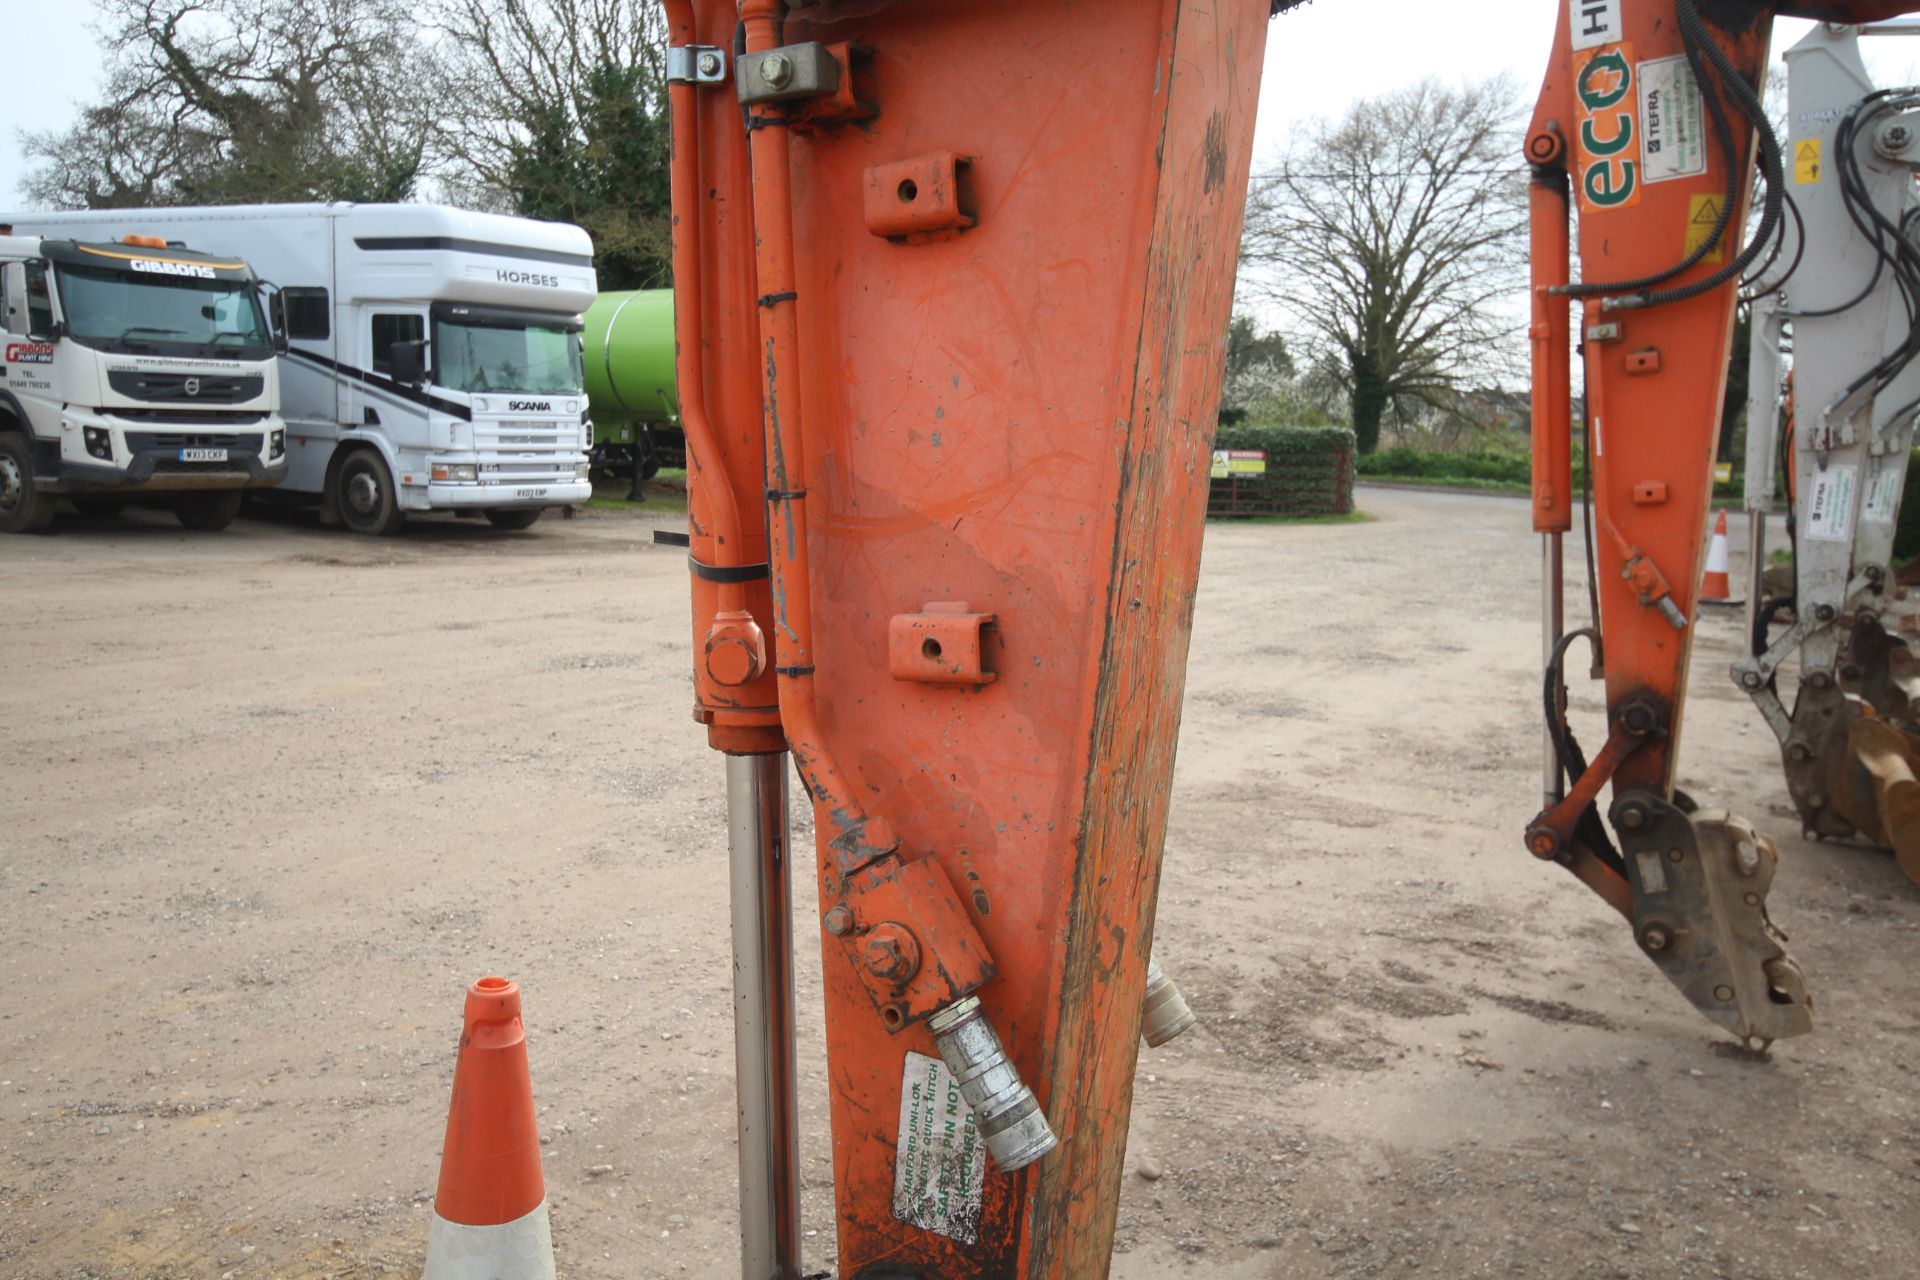 Hitachi Z-Axis 85-USB LC-3 8.5T rubber track excavator. 2012. 7,217 hours. Serial number HCM - Image 46 of 71